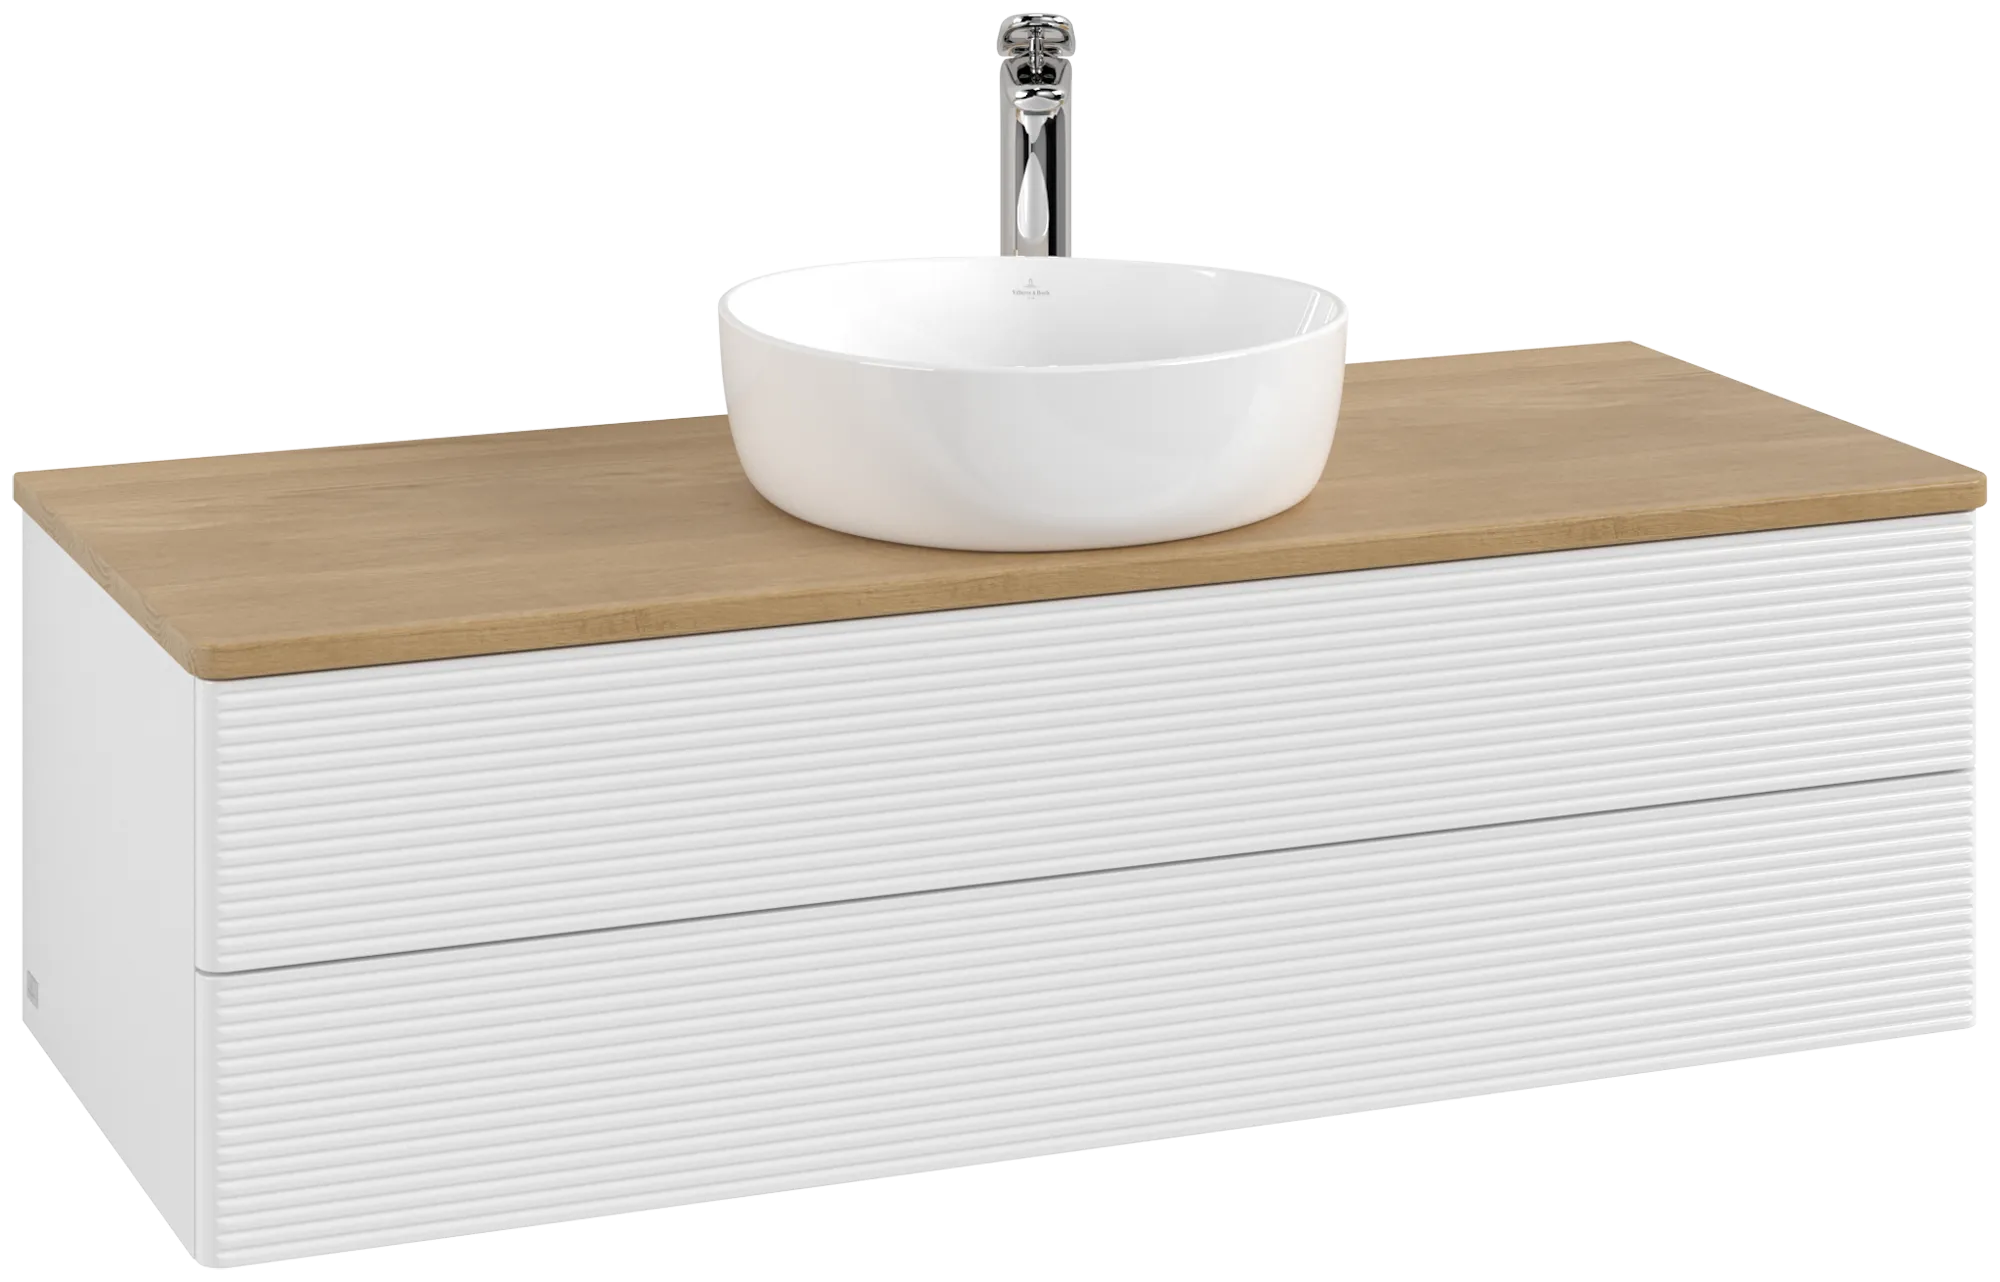 VILLEROY BOCH Antao Vanity unit, with lighting, 2 pull-out compartments, 1200 x 360 x 500 mm, Front with grain texture, Glossy White Lacquer / Honey Oak #L21151GF resmi